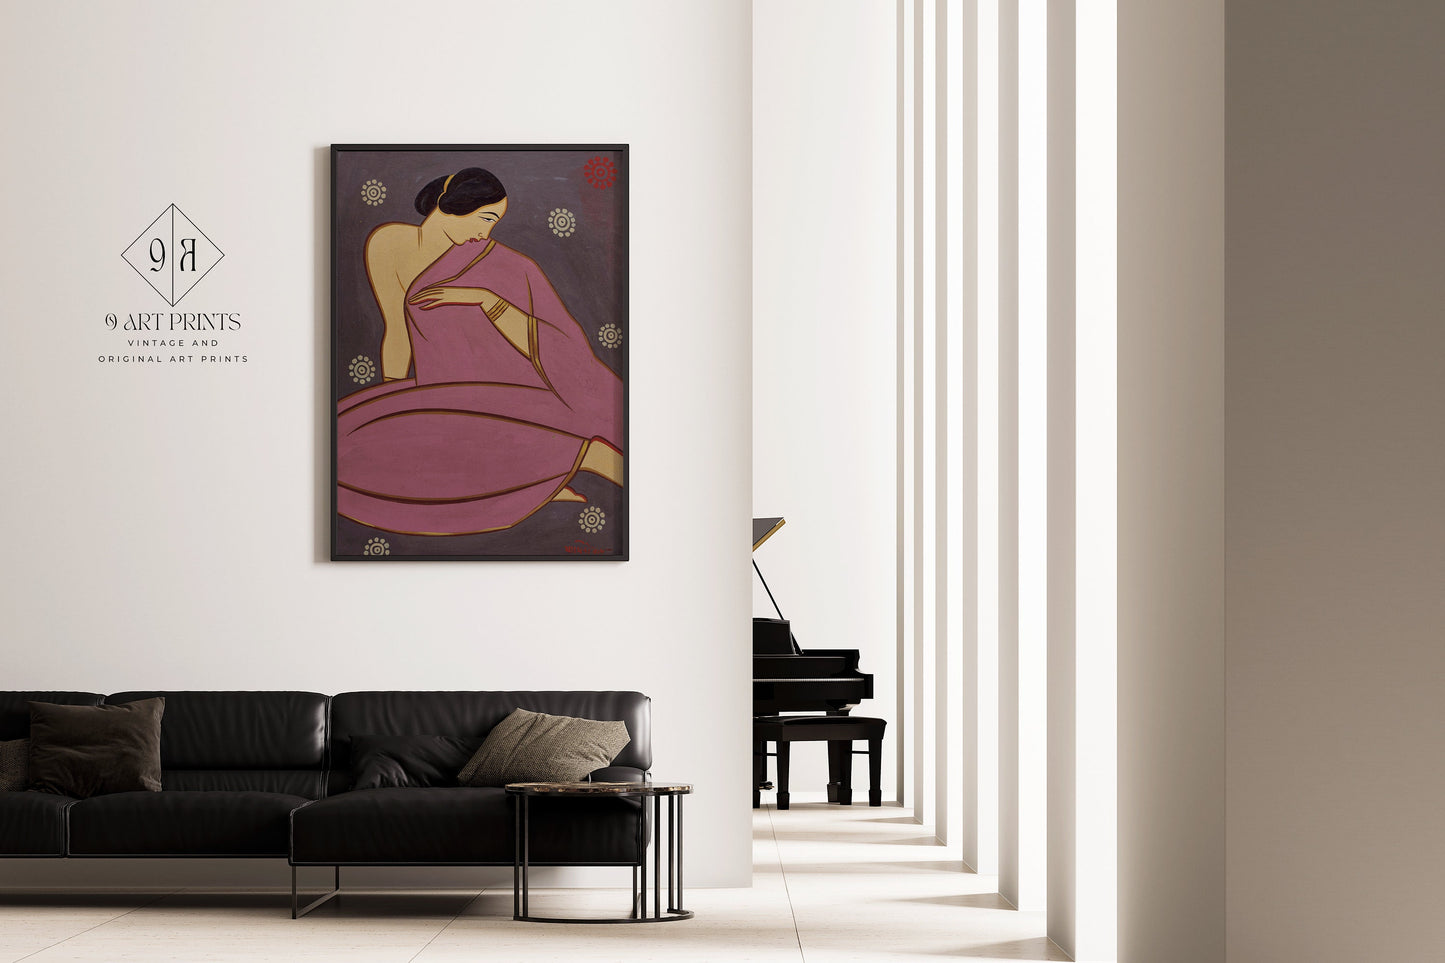 Jamini Roy Woman in Pink Sari Bengali Artist Fine Art Famous Iconic Painting Vintage Ready to hang Framed Home Office Decor Print Gift Idea